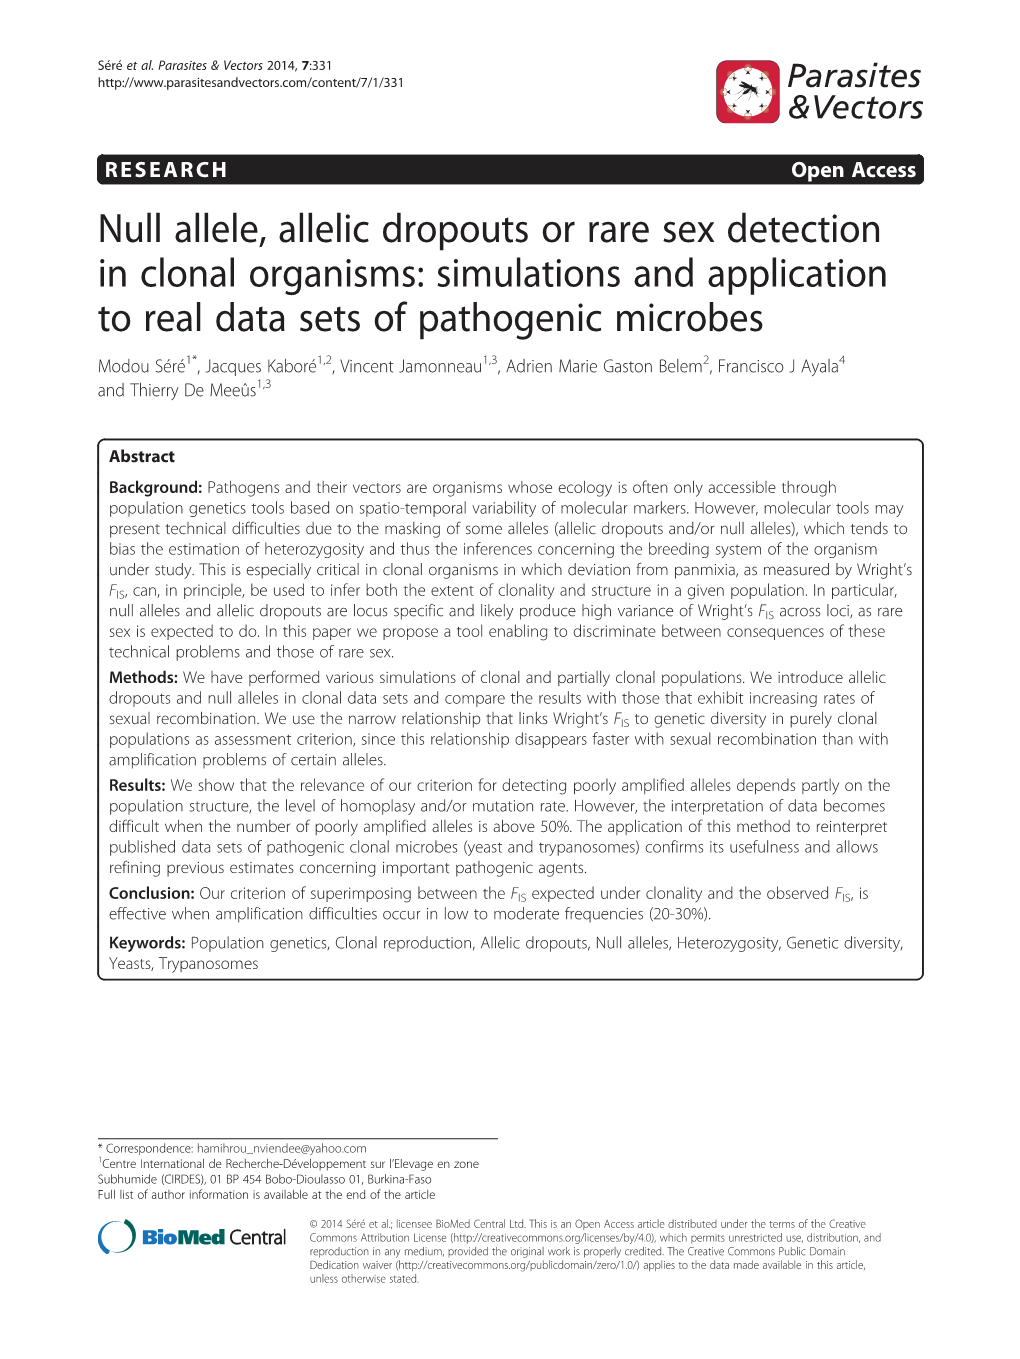 Null Allele, Allelic Dropouts Or Rare Sex Detection in Clonal Organisms